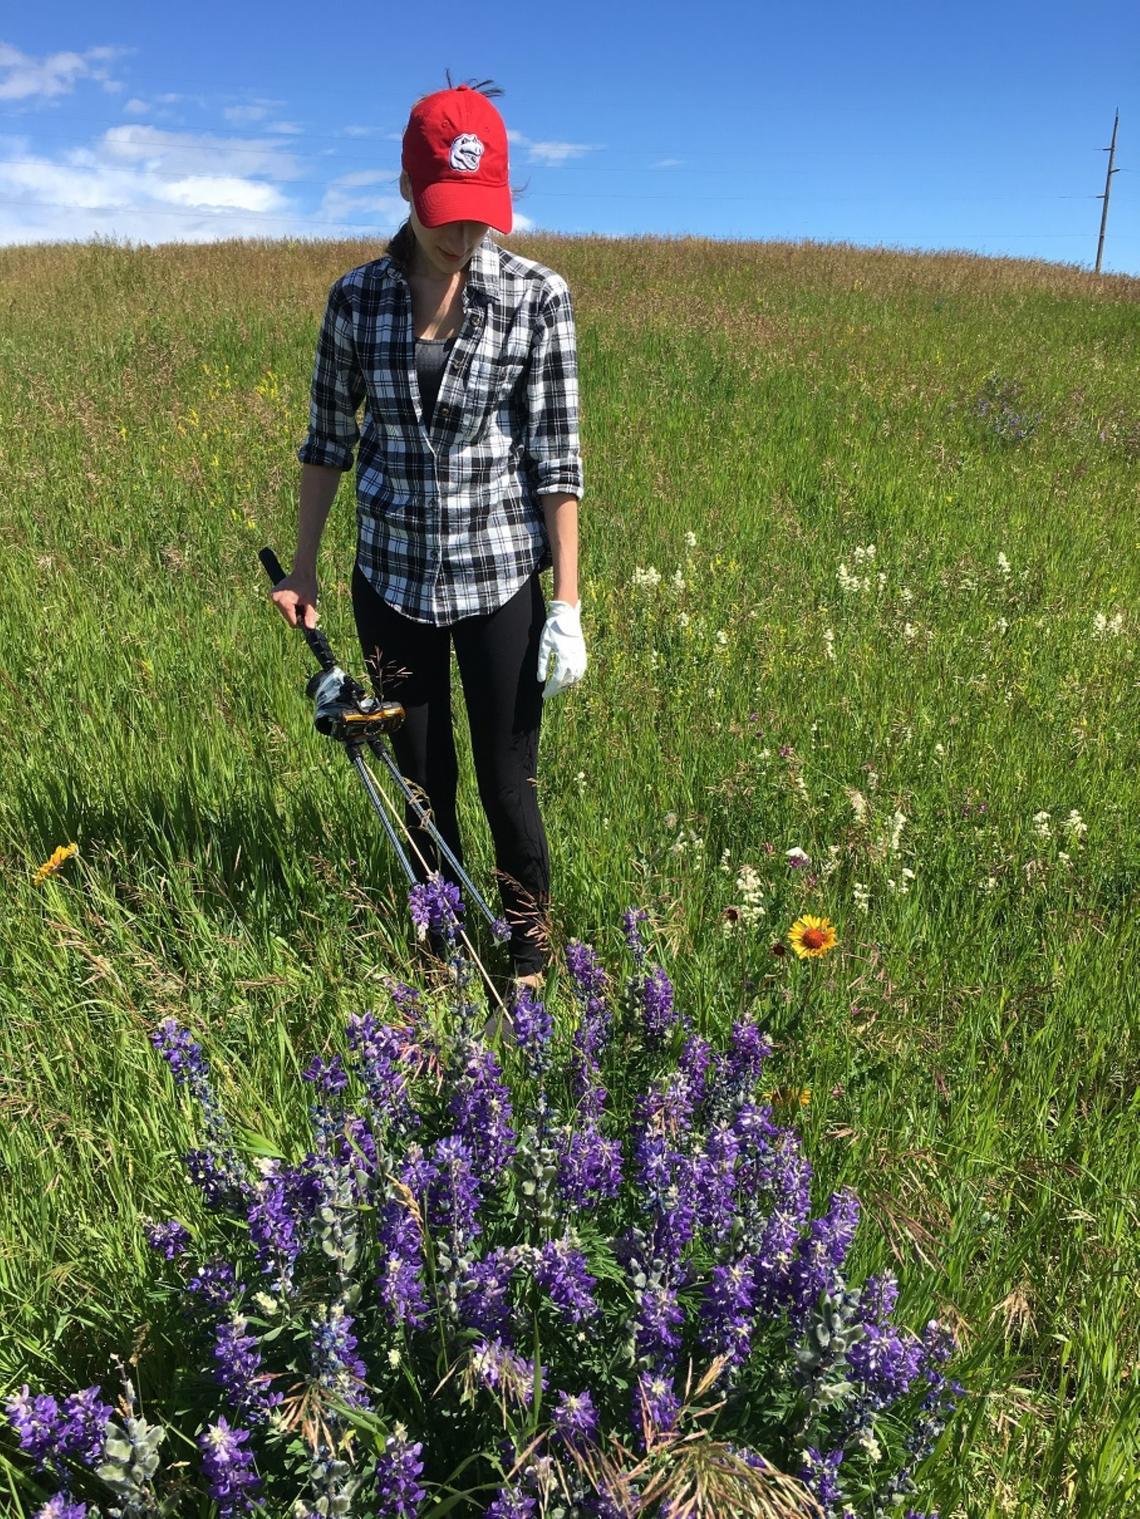 As part of her research project, Maddison Canuel recorded the movements of bumblebees at Nose Hill park in Calgary. Photo courtesy Maddison Canuel